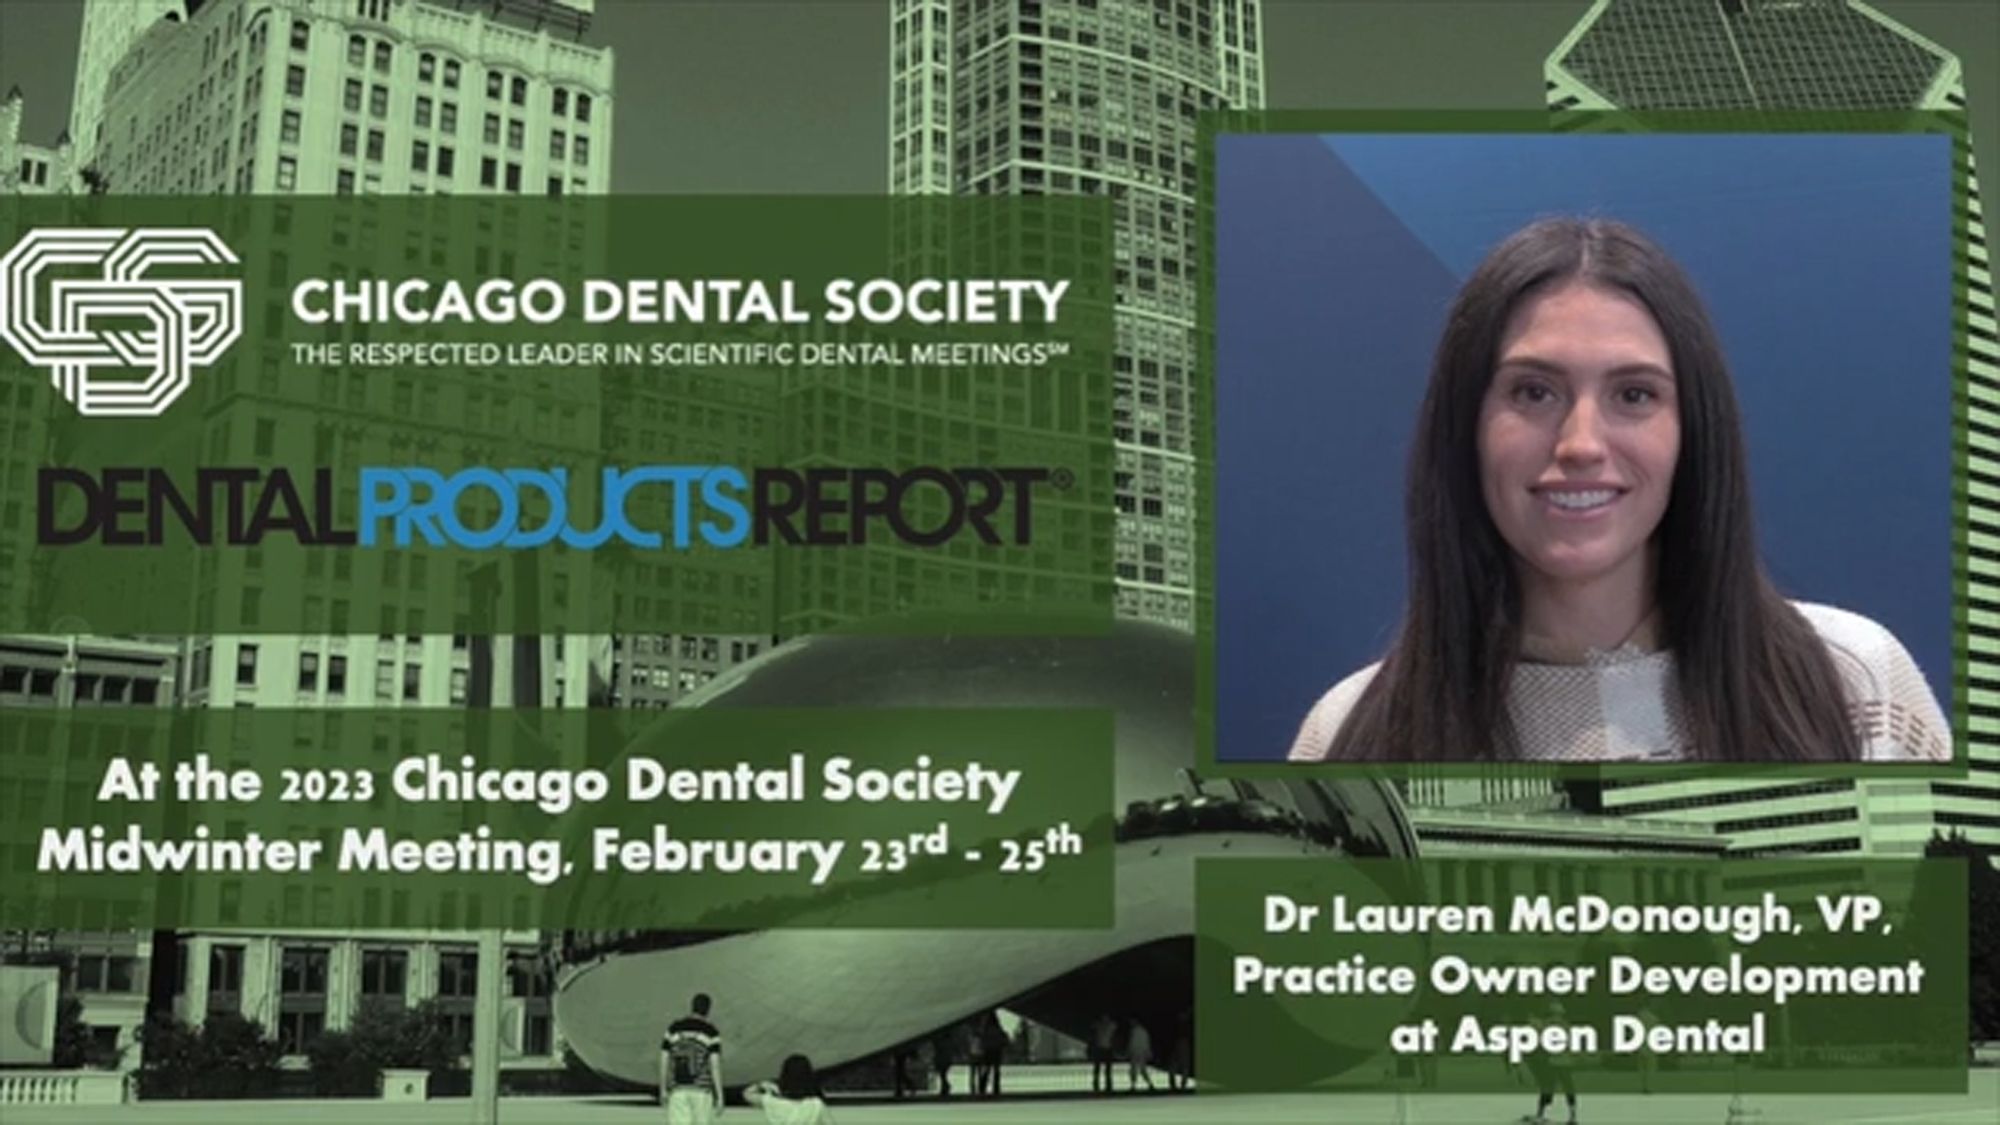 2023 Chicago Dental Society Midwinter Meeting, Interview with Dr Lauren